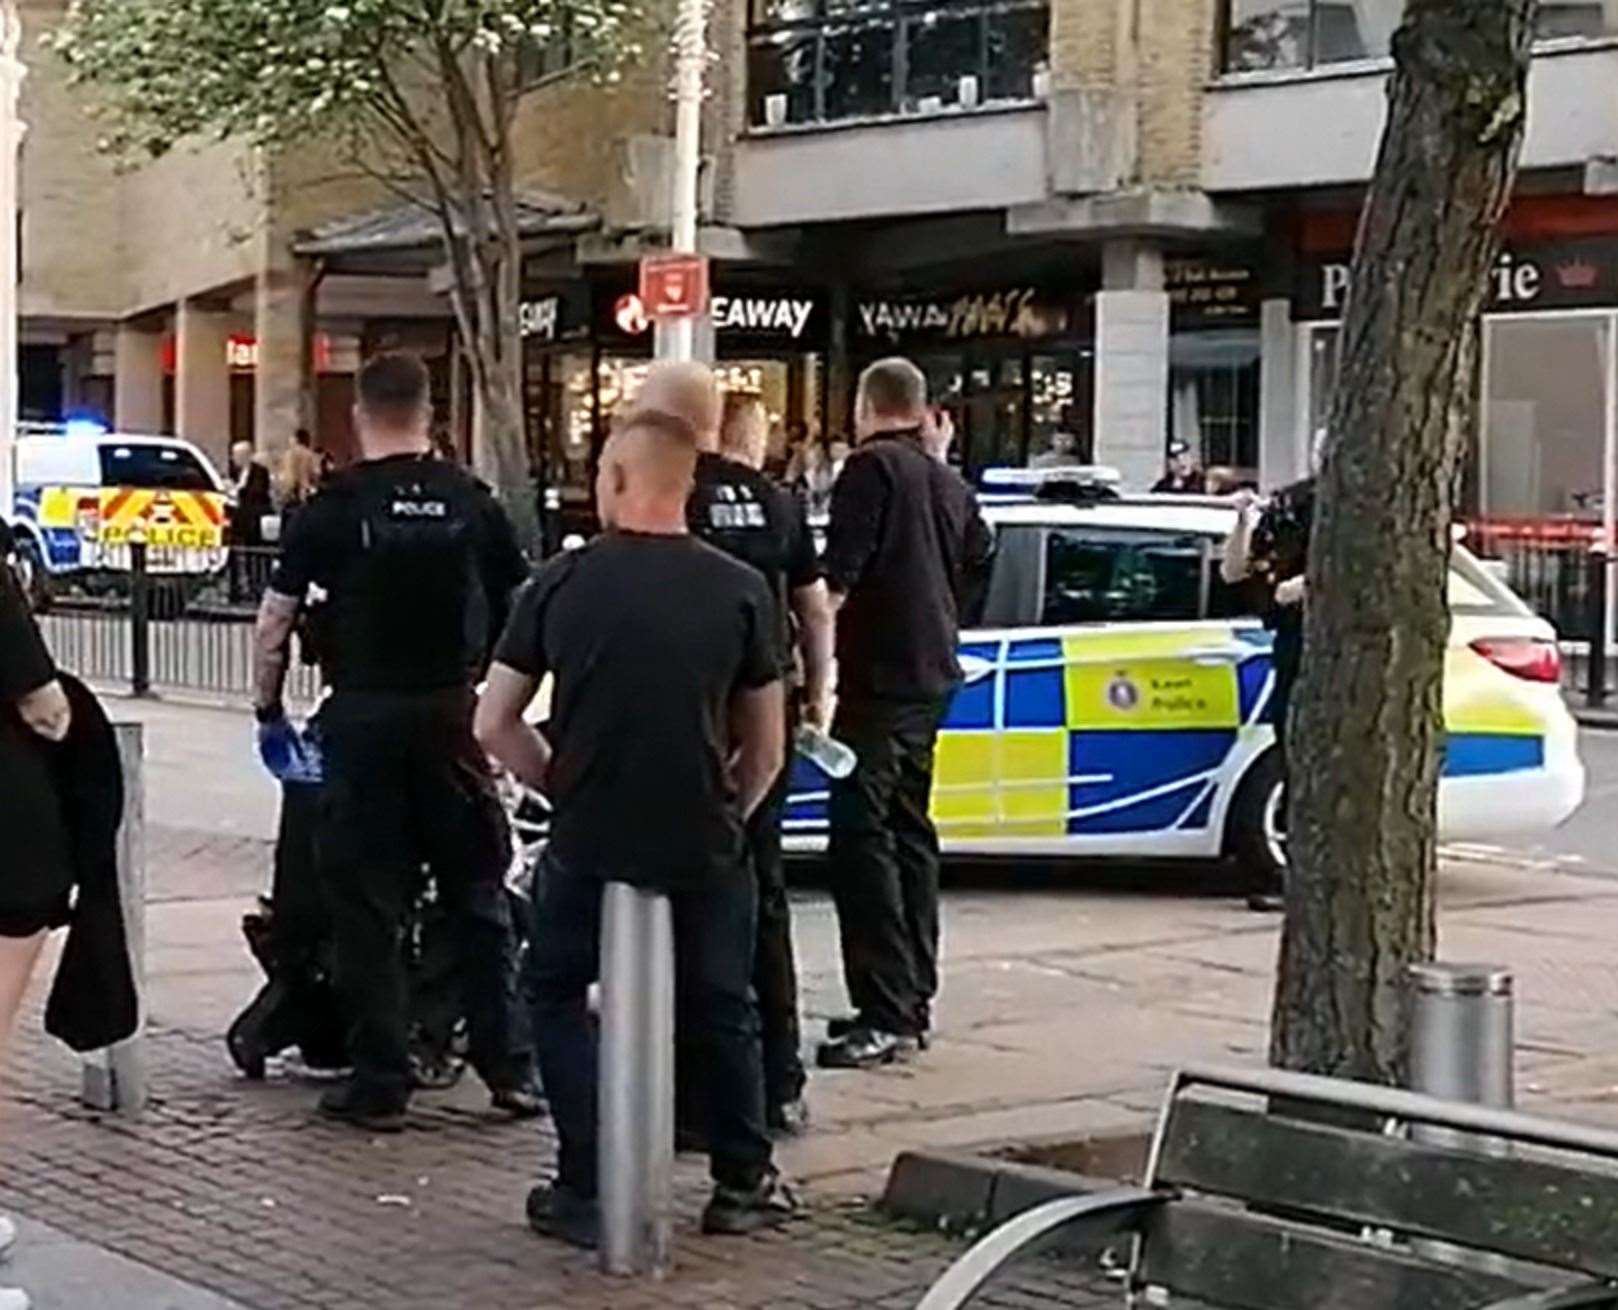 Police called to a disturbance in Folkestone town centre this evening. Picture: @Kent_999s / Twitter